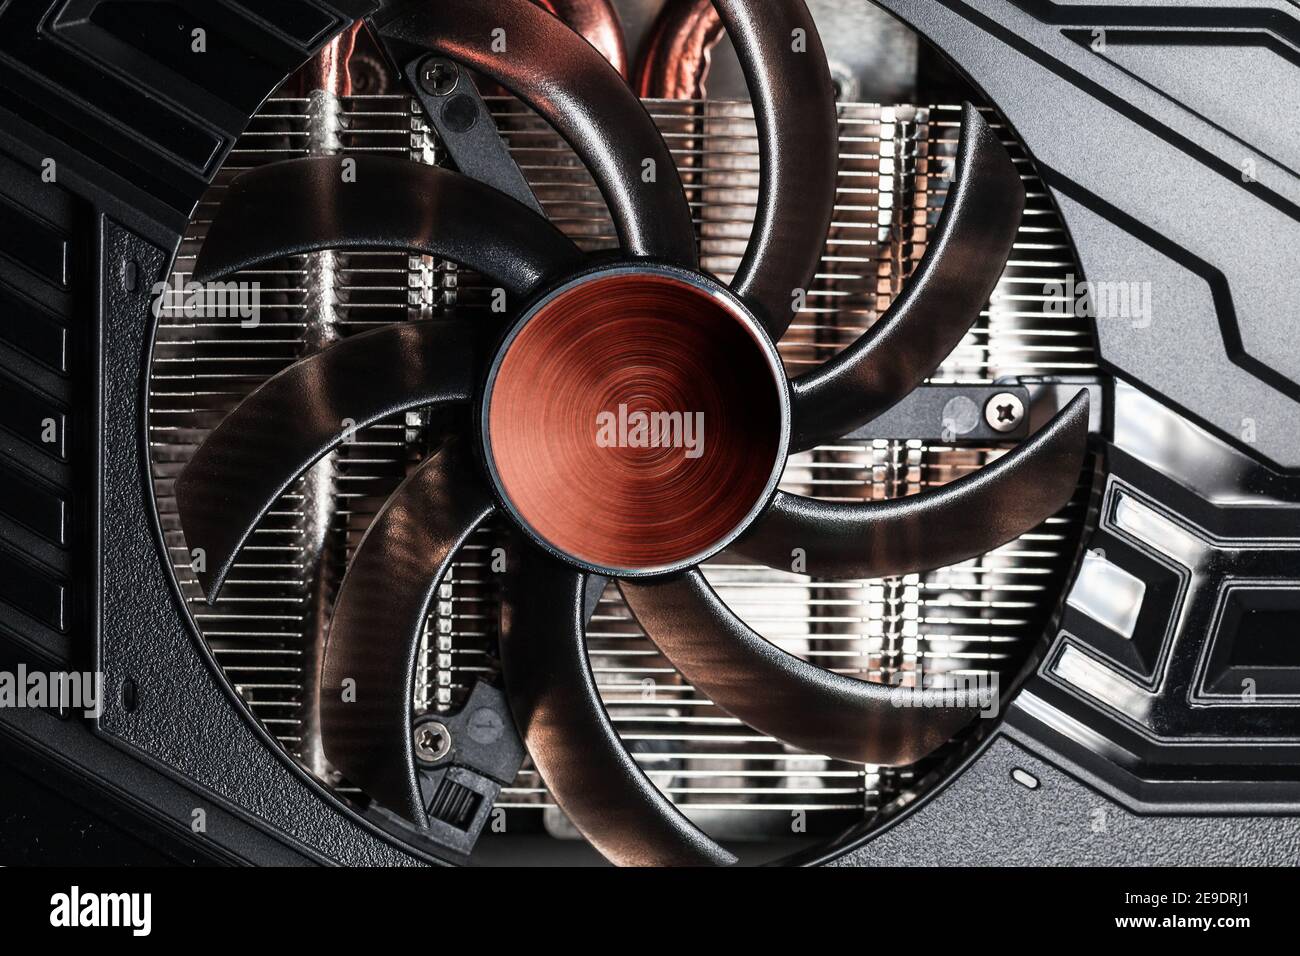 New shiny black GPU cooler with red center, close-up photo. This fan is mounted on a video card to cool the GPU and surrounding components Stock Photo